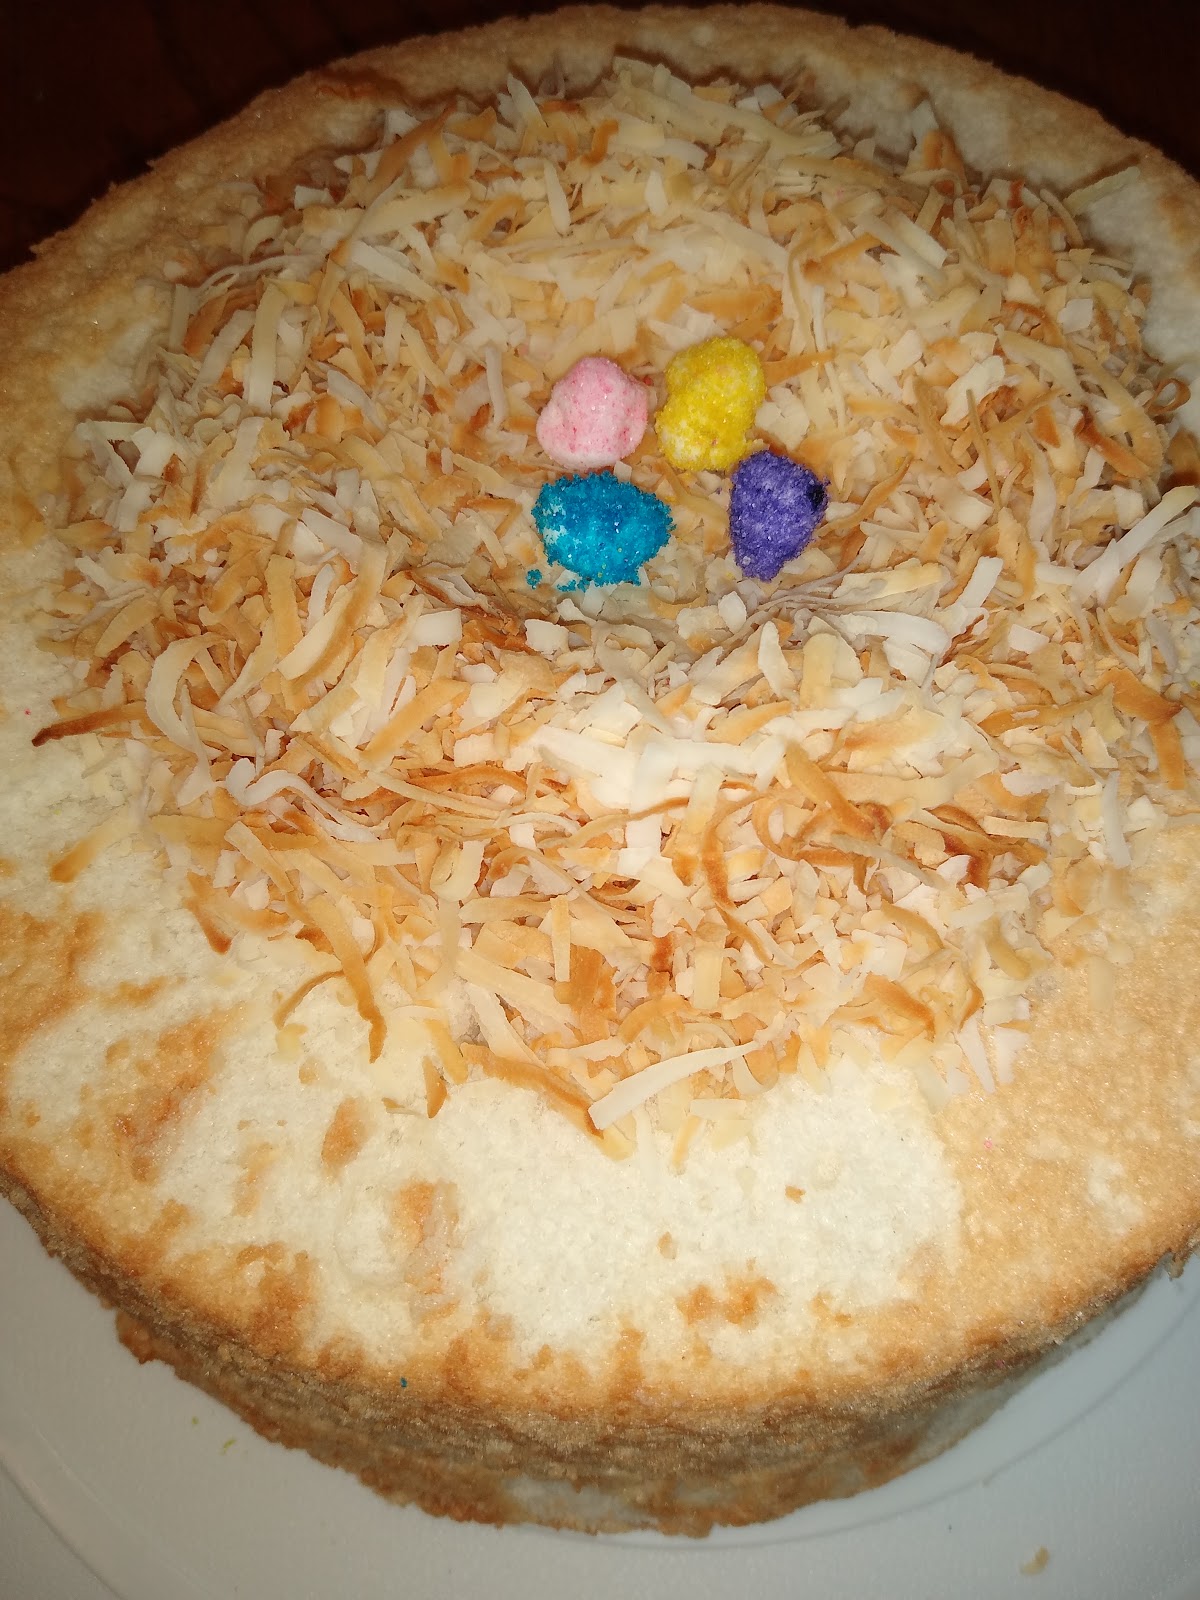 marshmallow eggs in a toasted coconut nest picture